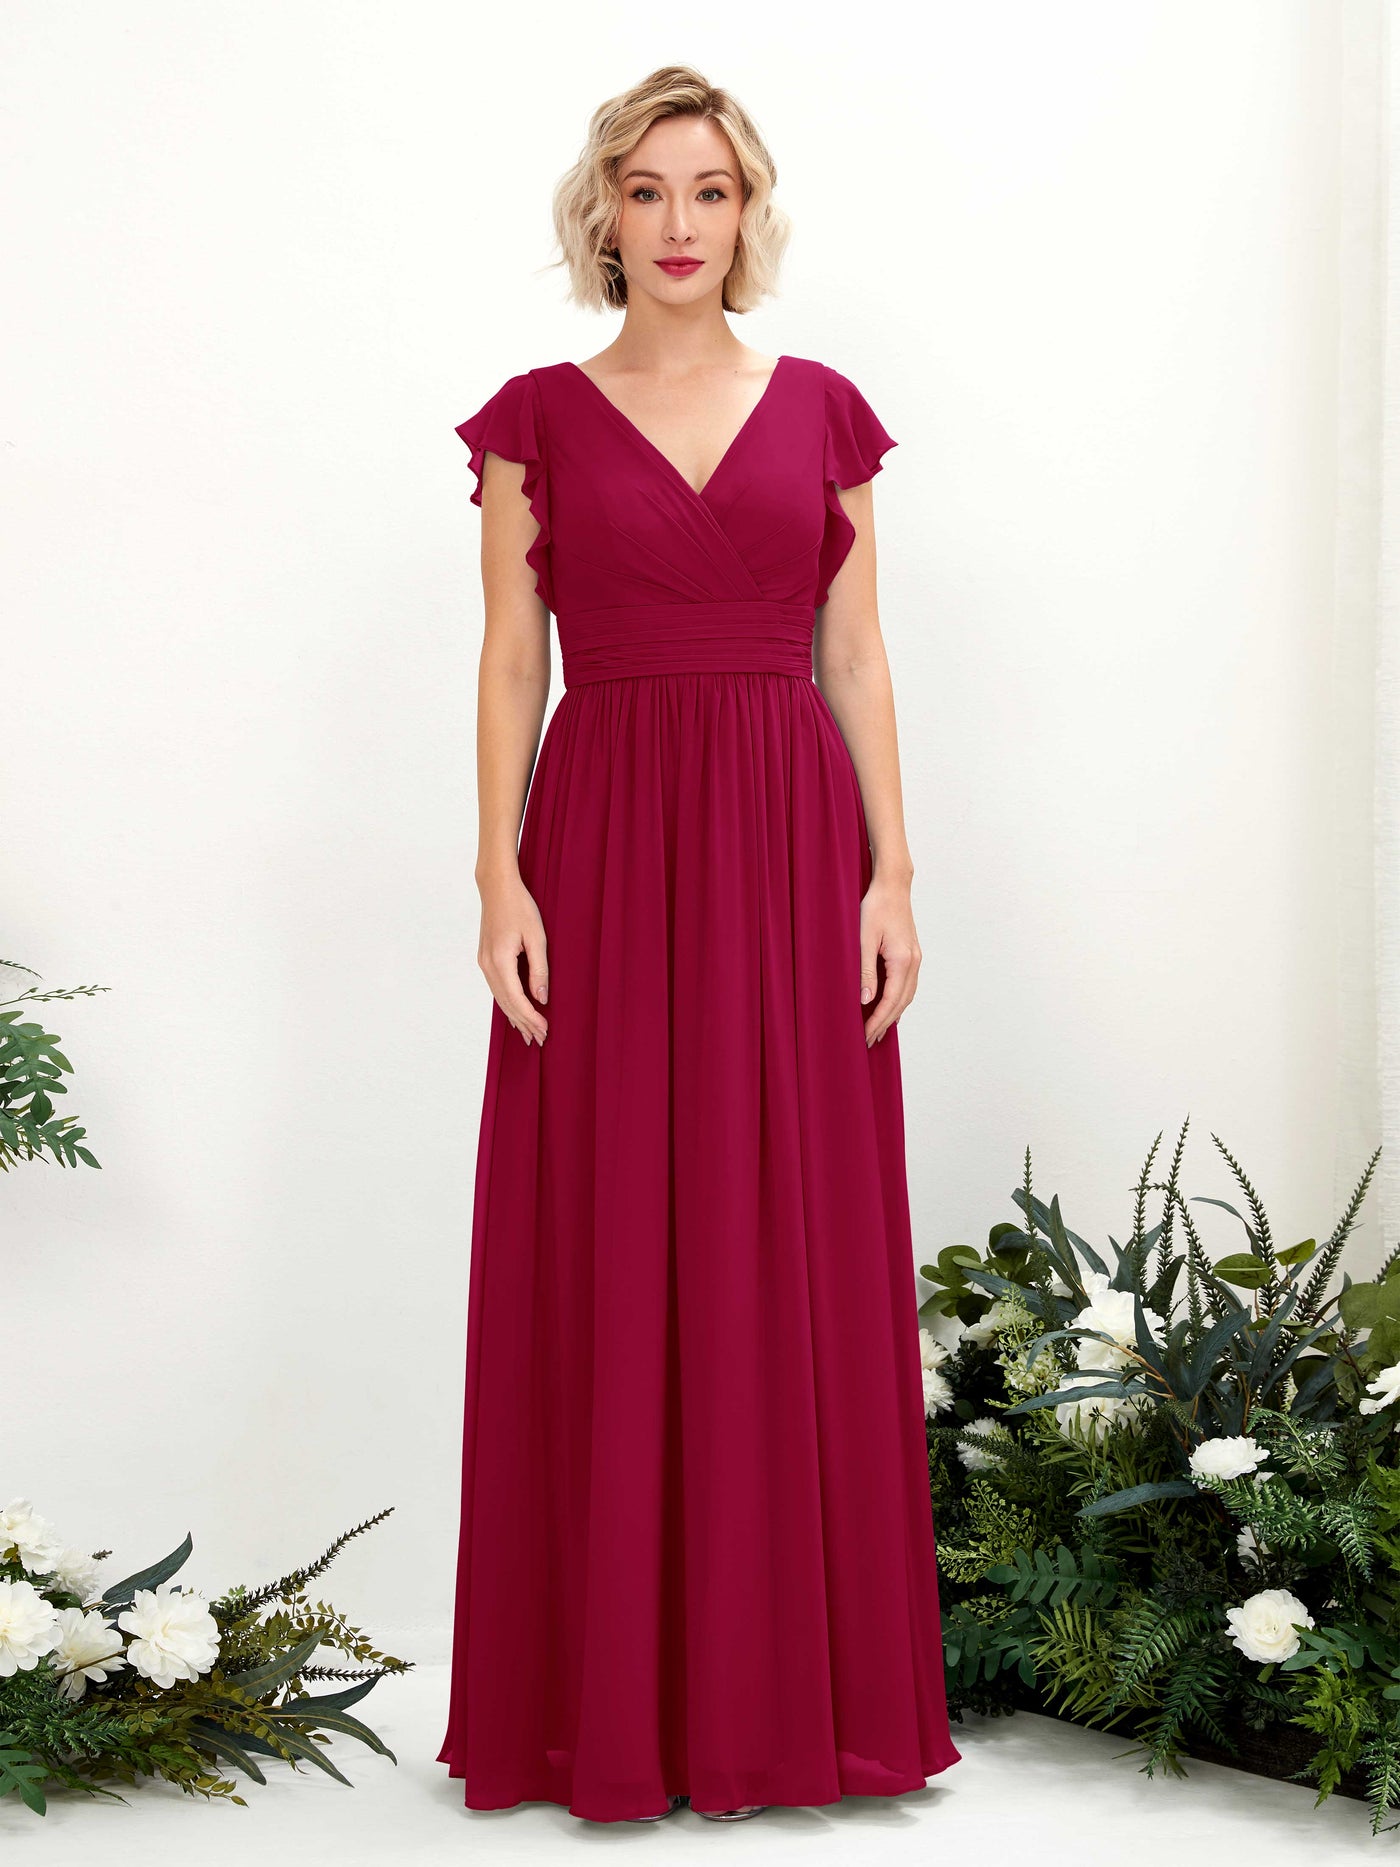 Jester Red Bridesmaid Dresses Bridesmaid Dress A-line Chiffon V-neck Full Length Short Sleeves Wedding Party Dress (81222741)#color_jester-red